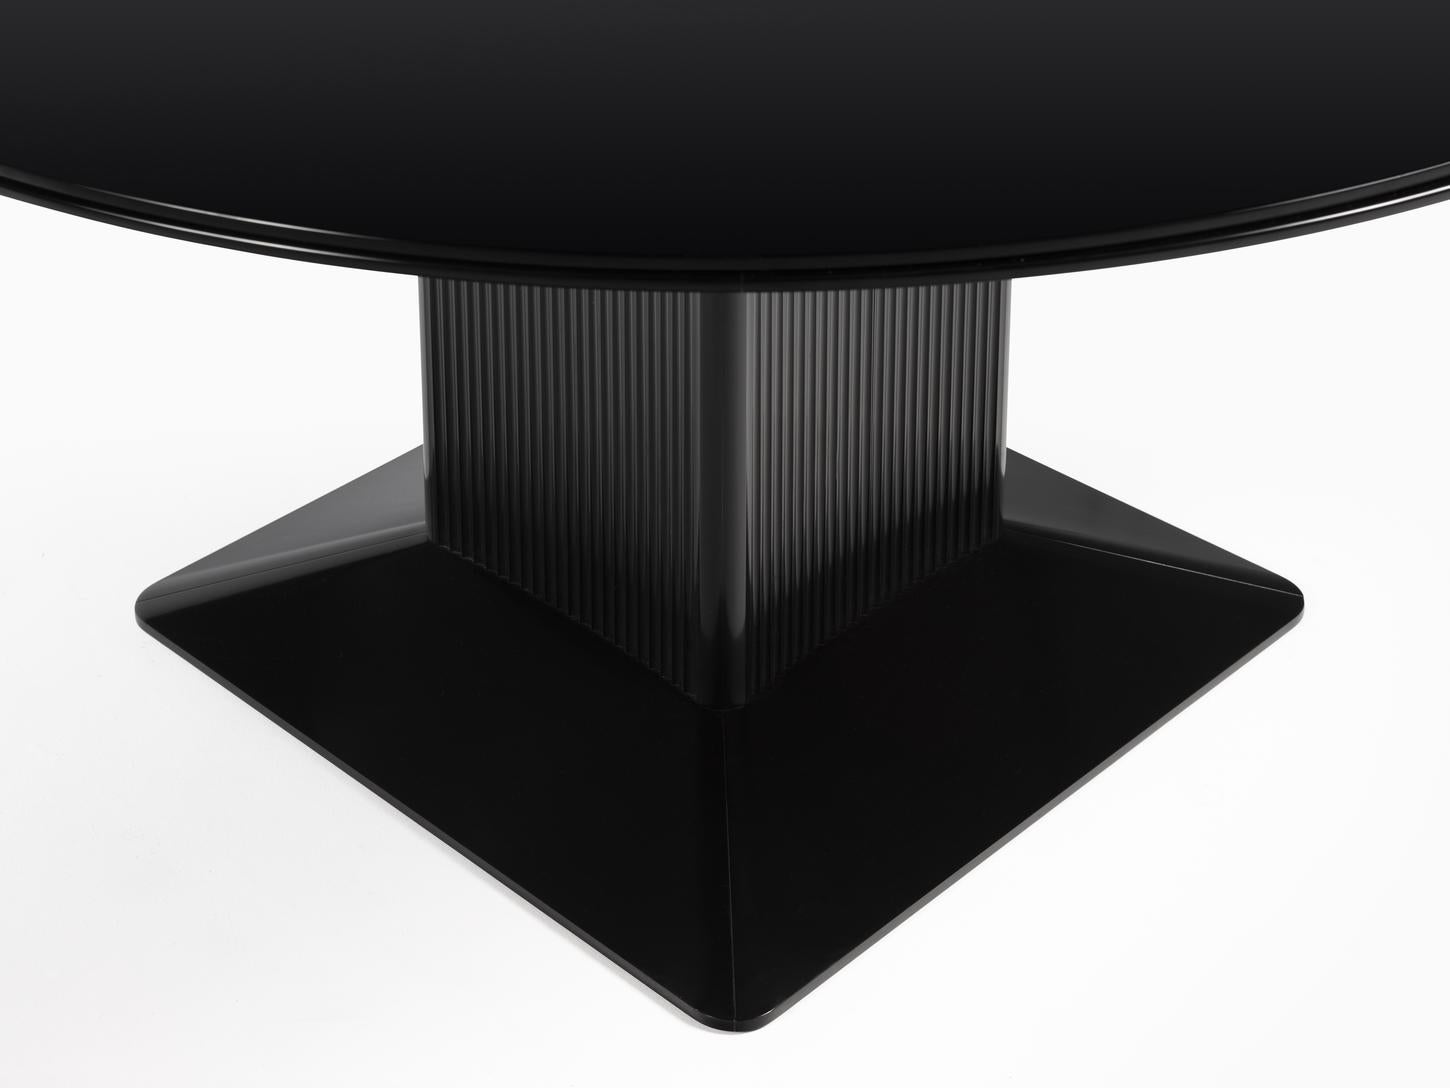 Like its ink-black namesake, Obsidian is discreet, yet arresting. This round, glass-topped table is characterized by its sculptural, modulated base and sleek dining surface. Vertical ribbing adds texture to the subtly shaped, architectural pedestal,